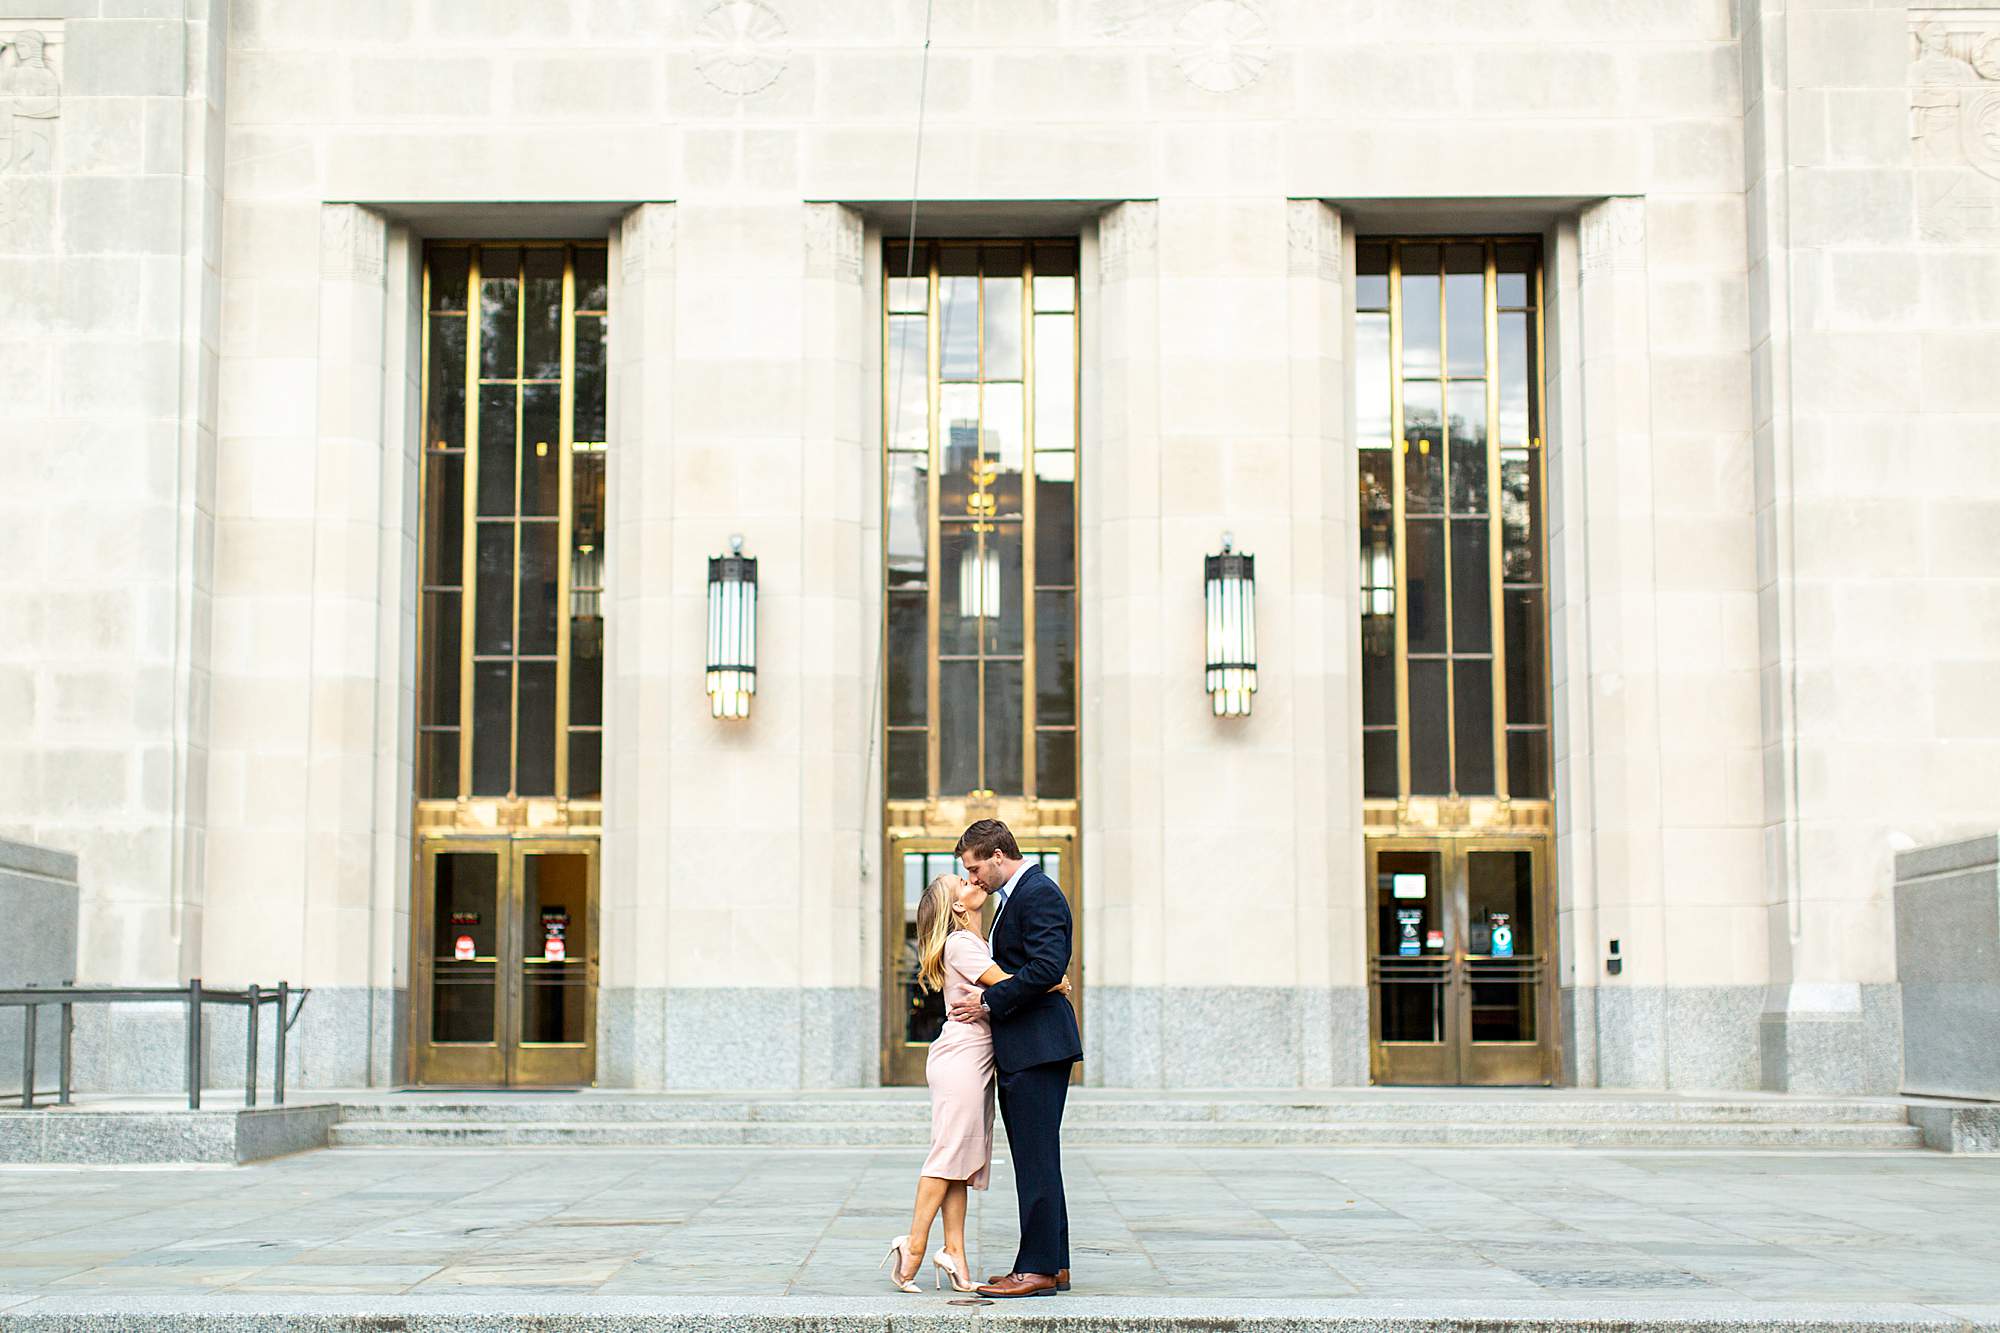 The sweetest spring anniversary session for a go-getter couple at the iconic Linn Park in downtown Birmingham by the courthouse.